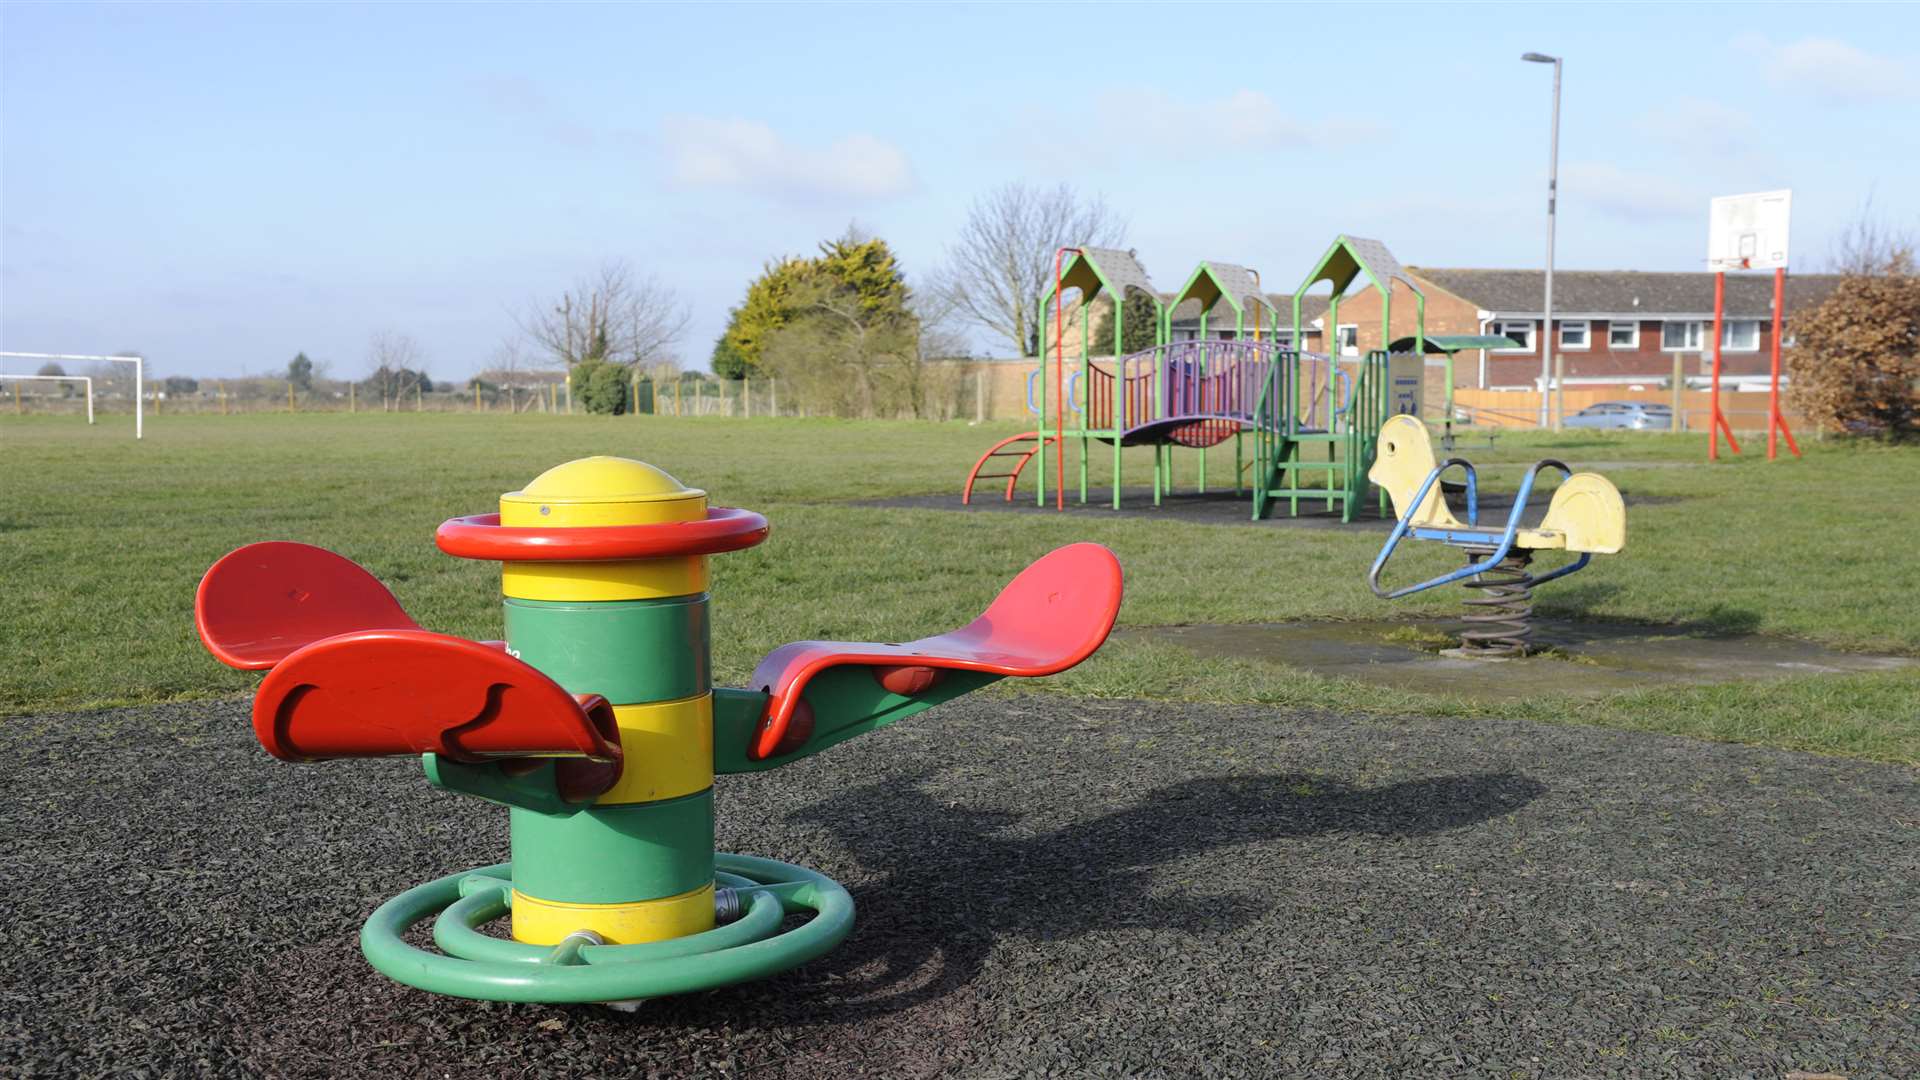 Playpark, The Meadow, Teynham, which has been repeatedly vandalised